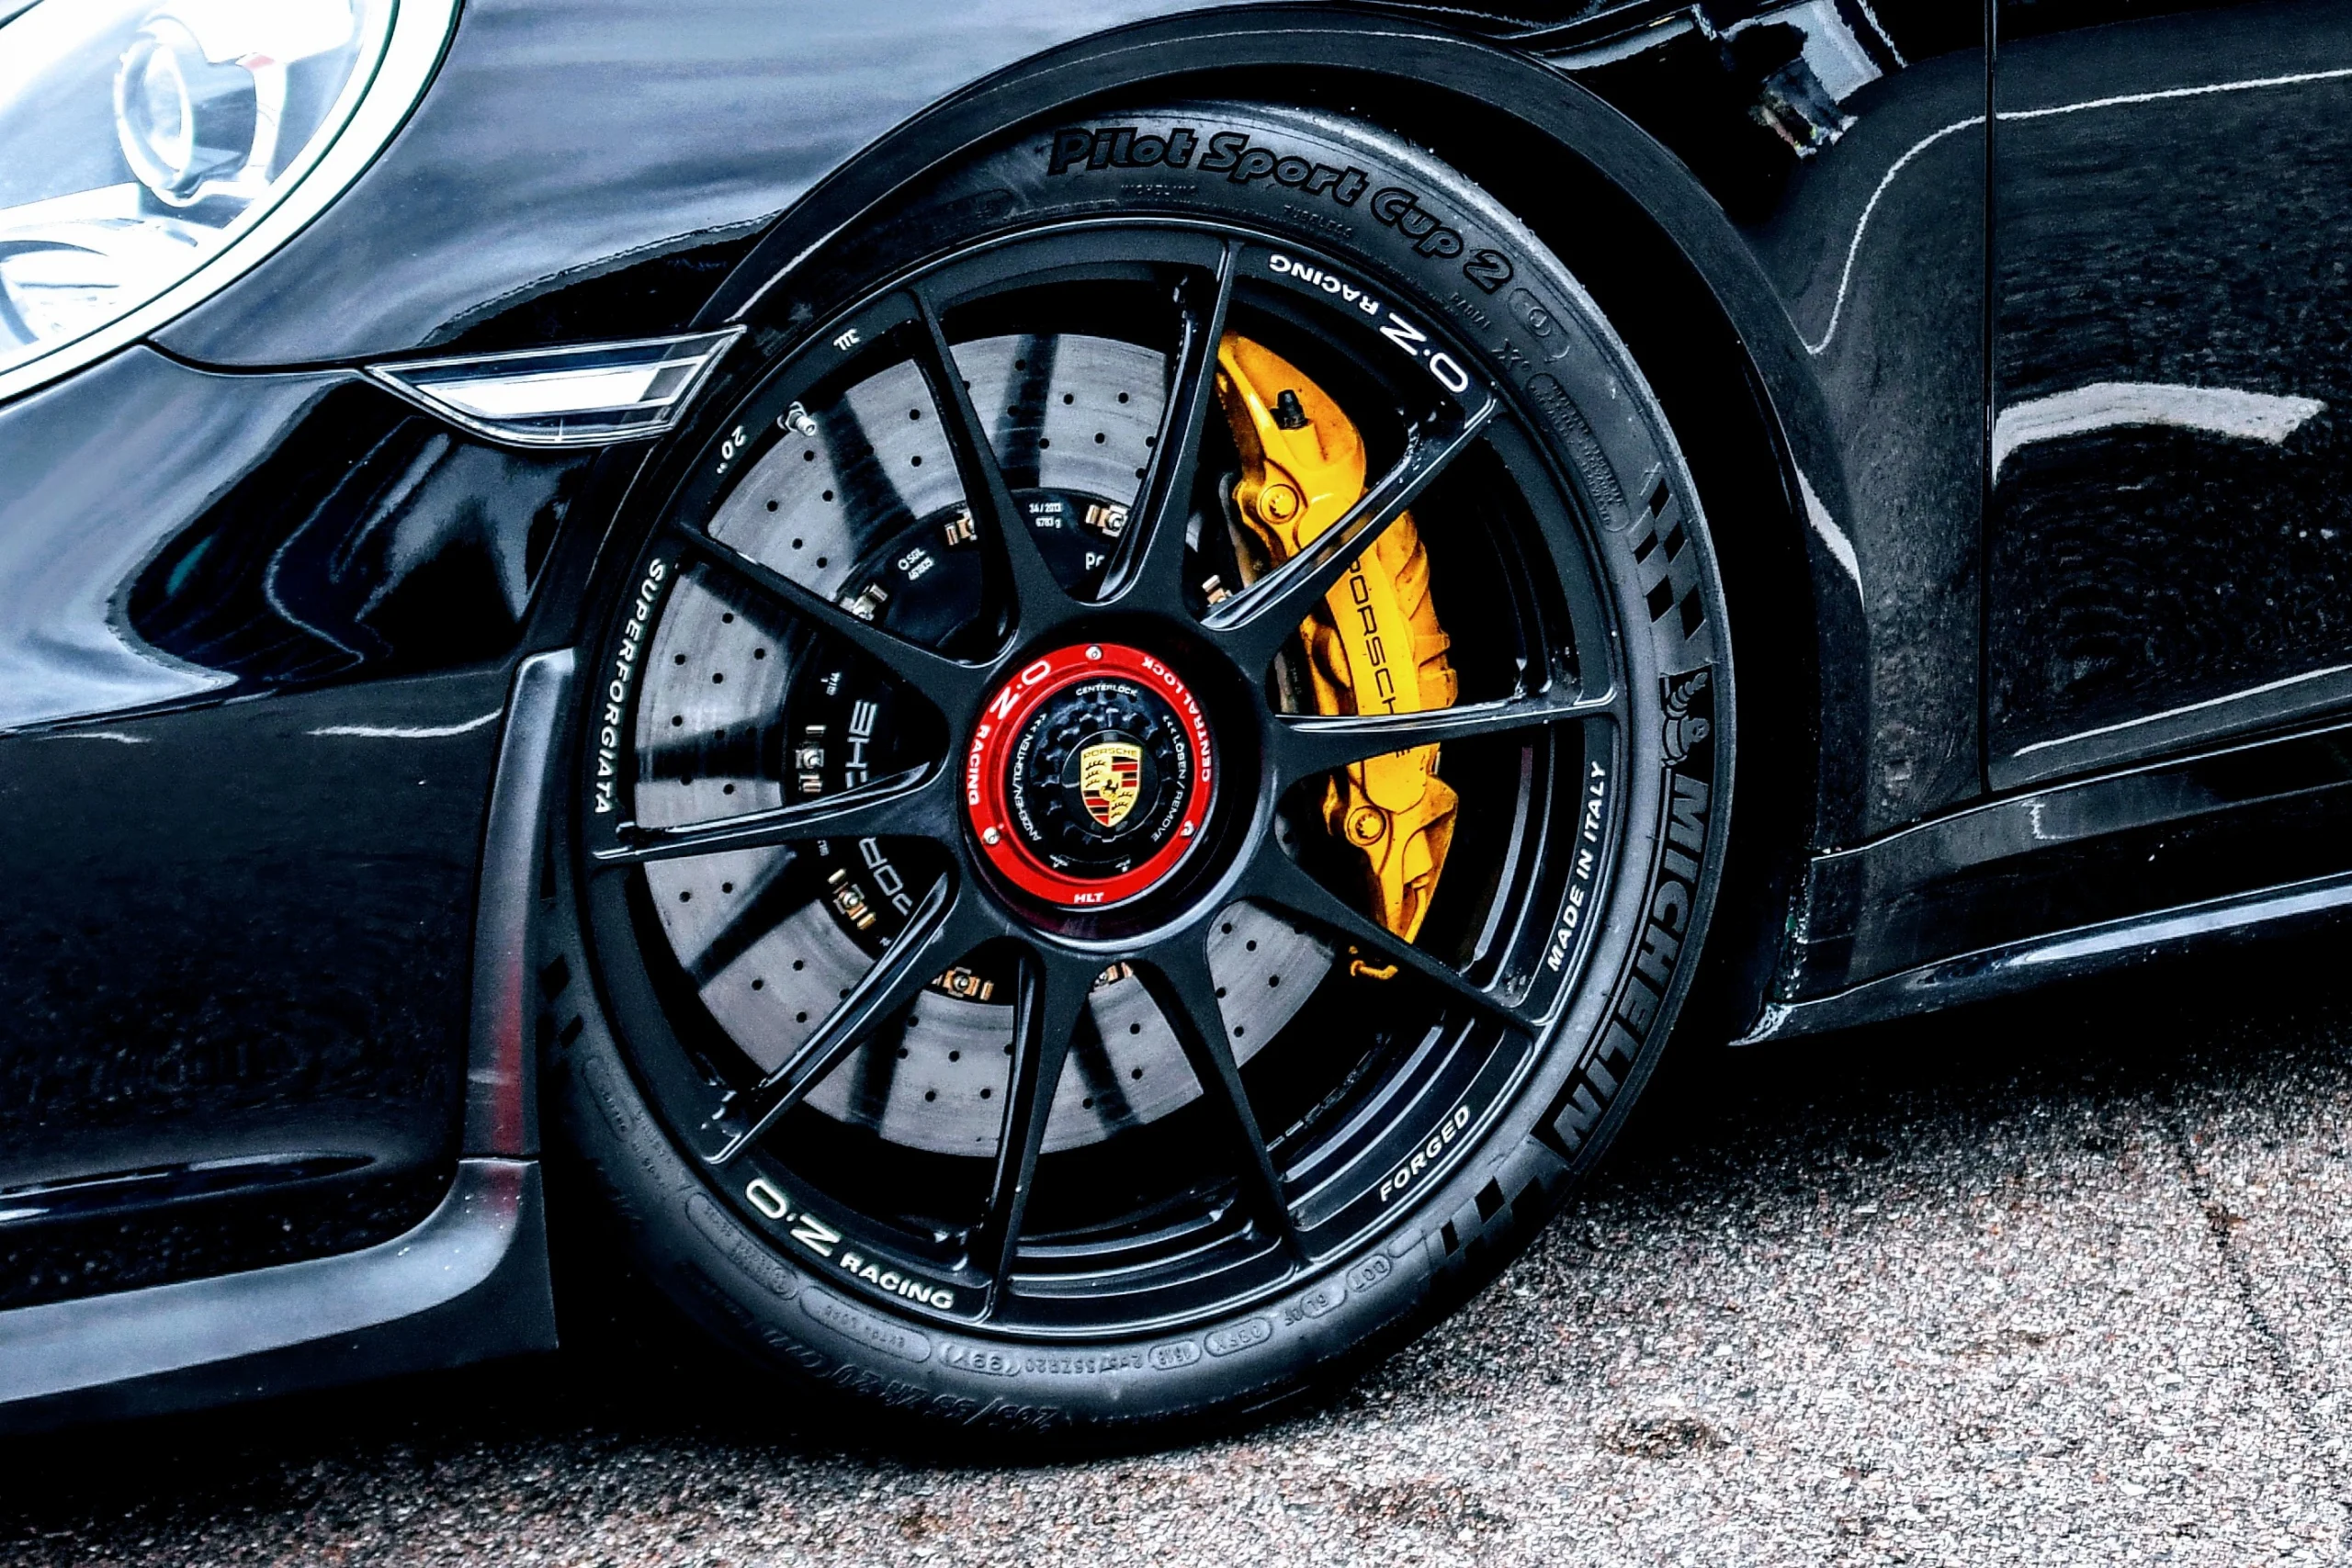 Close up of Michelin Pilot Sport Cup 2 tire on a black Porsche 911 with OZ center-lock wheels